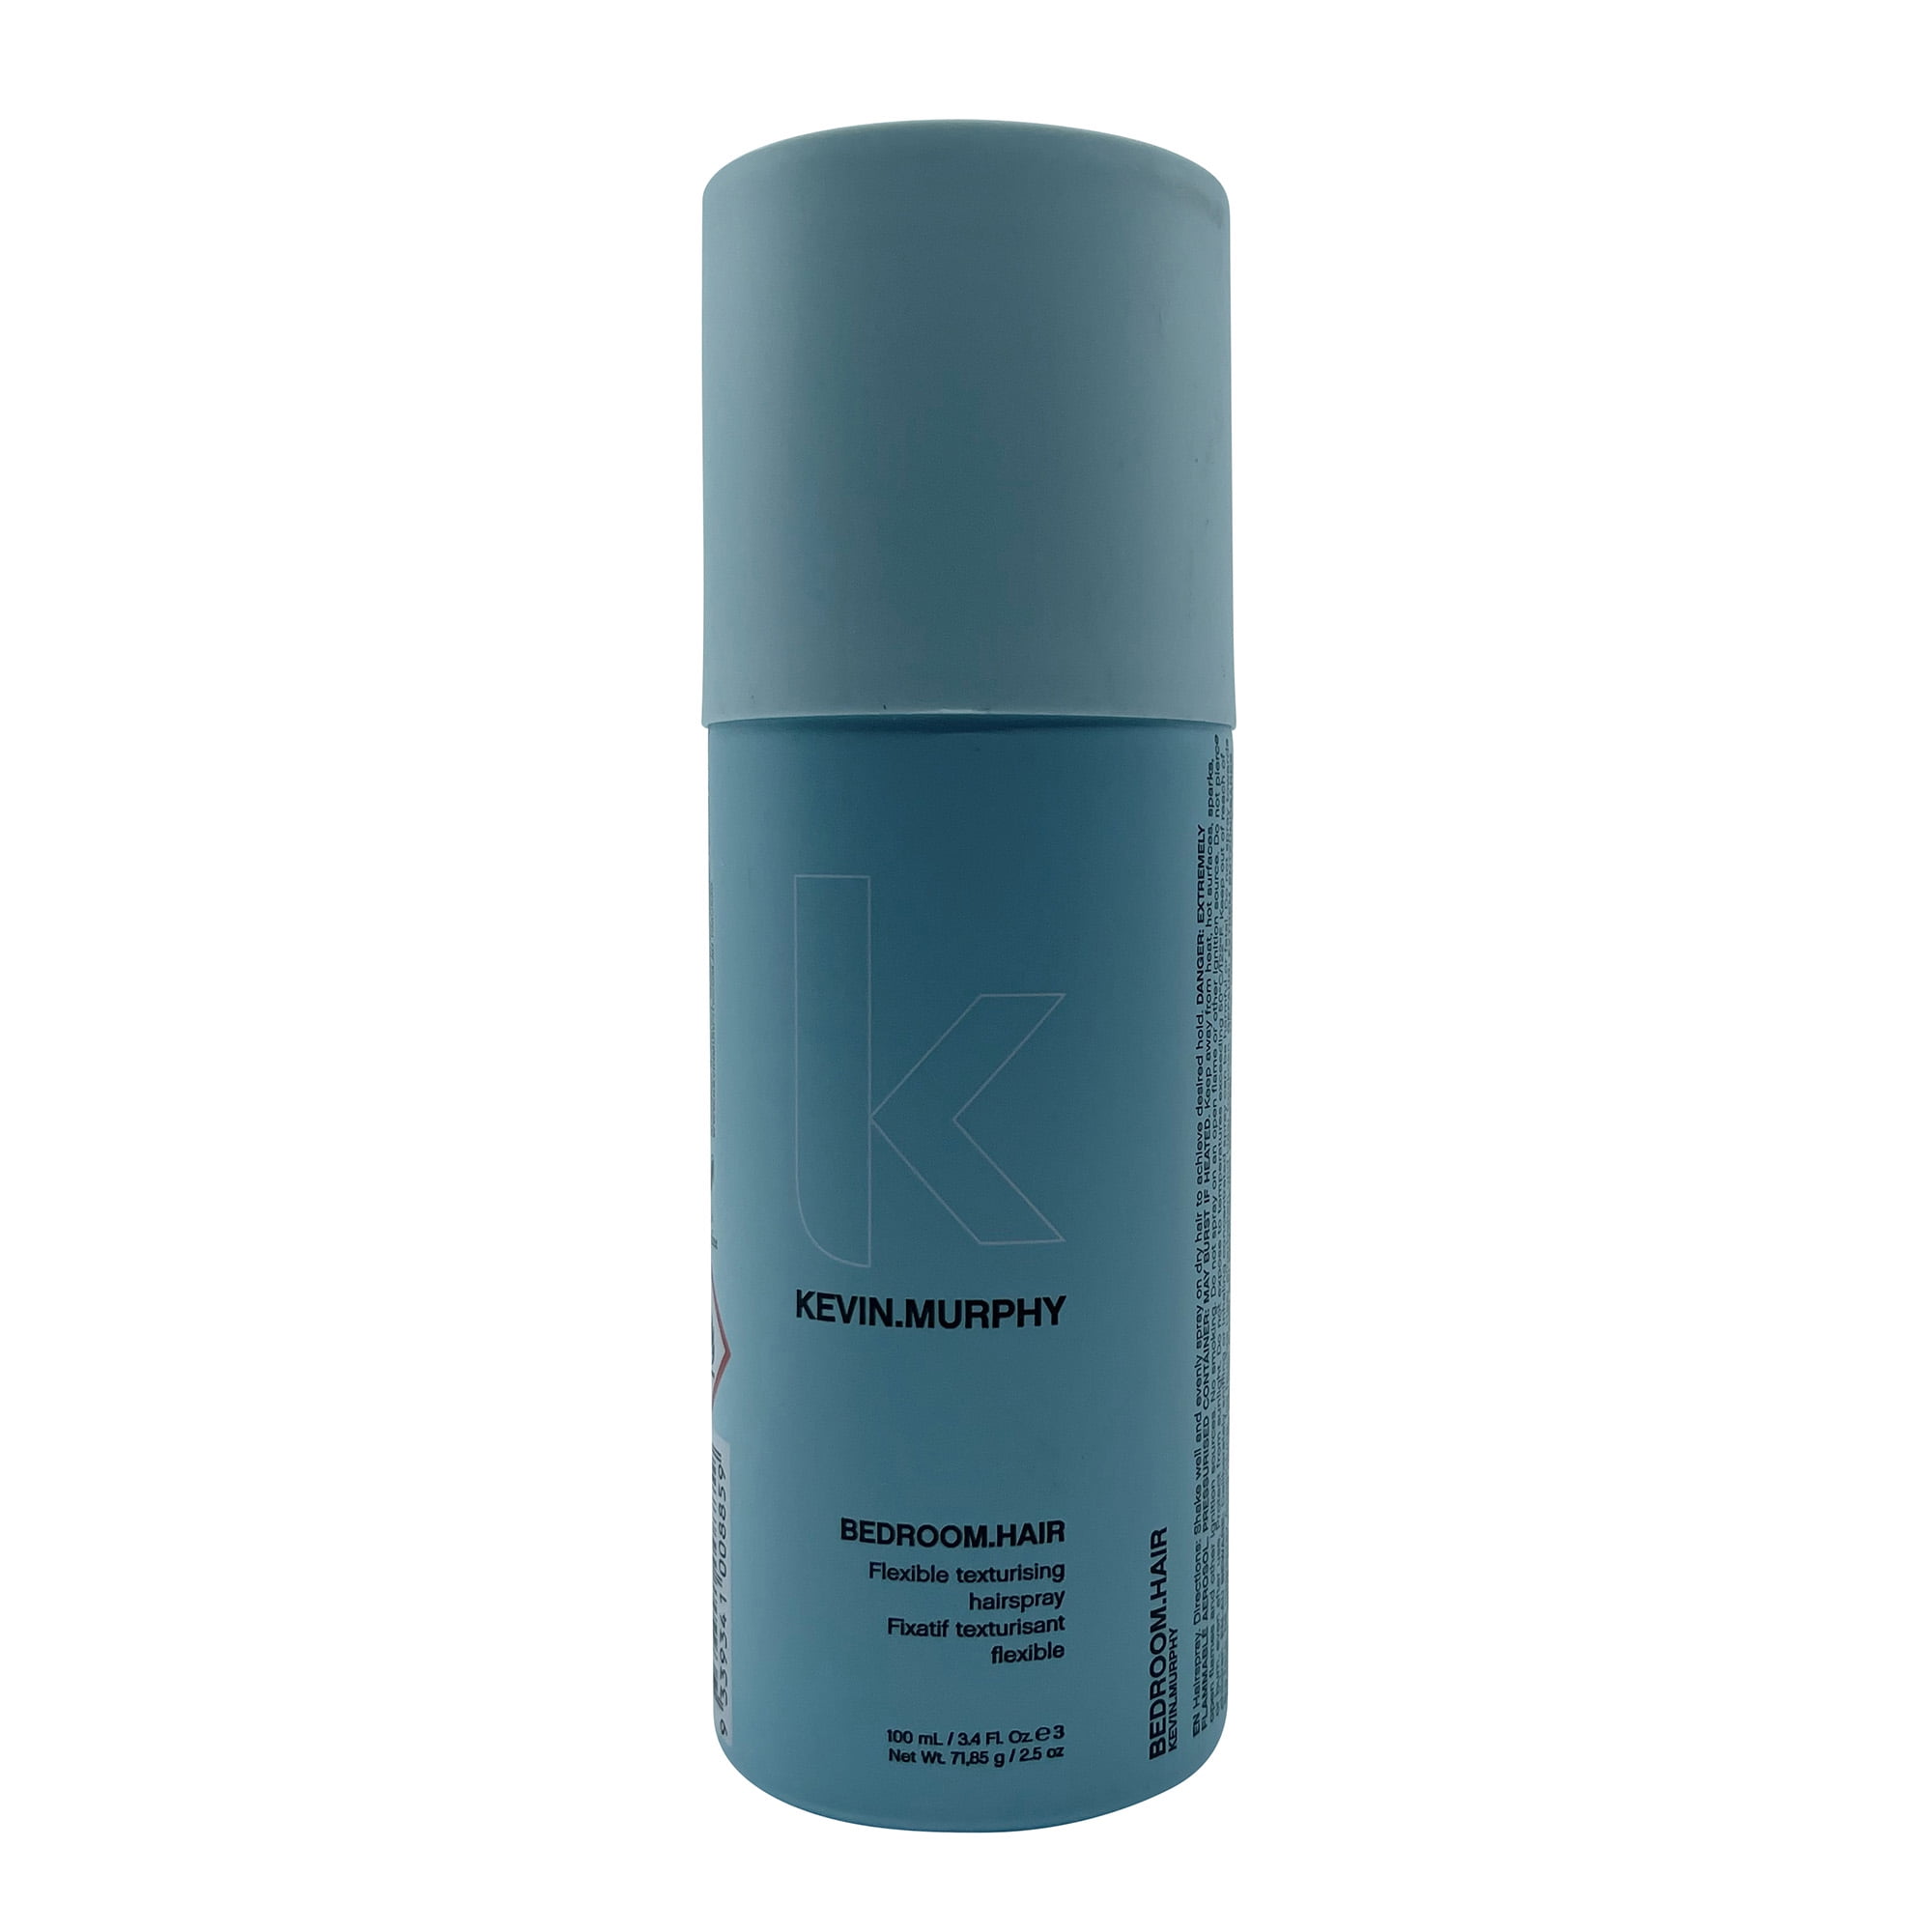 Kevin Murphy Bedroom Hair  Premium Haircare Online at colleennz